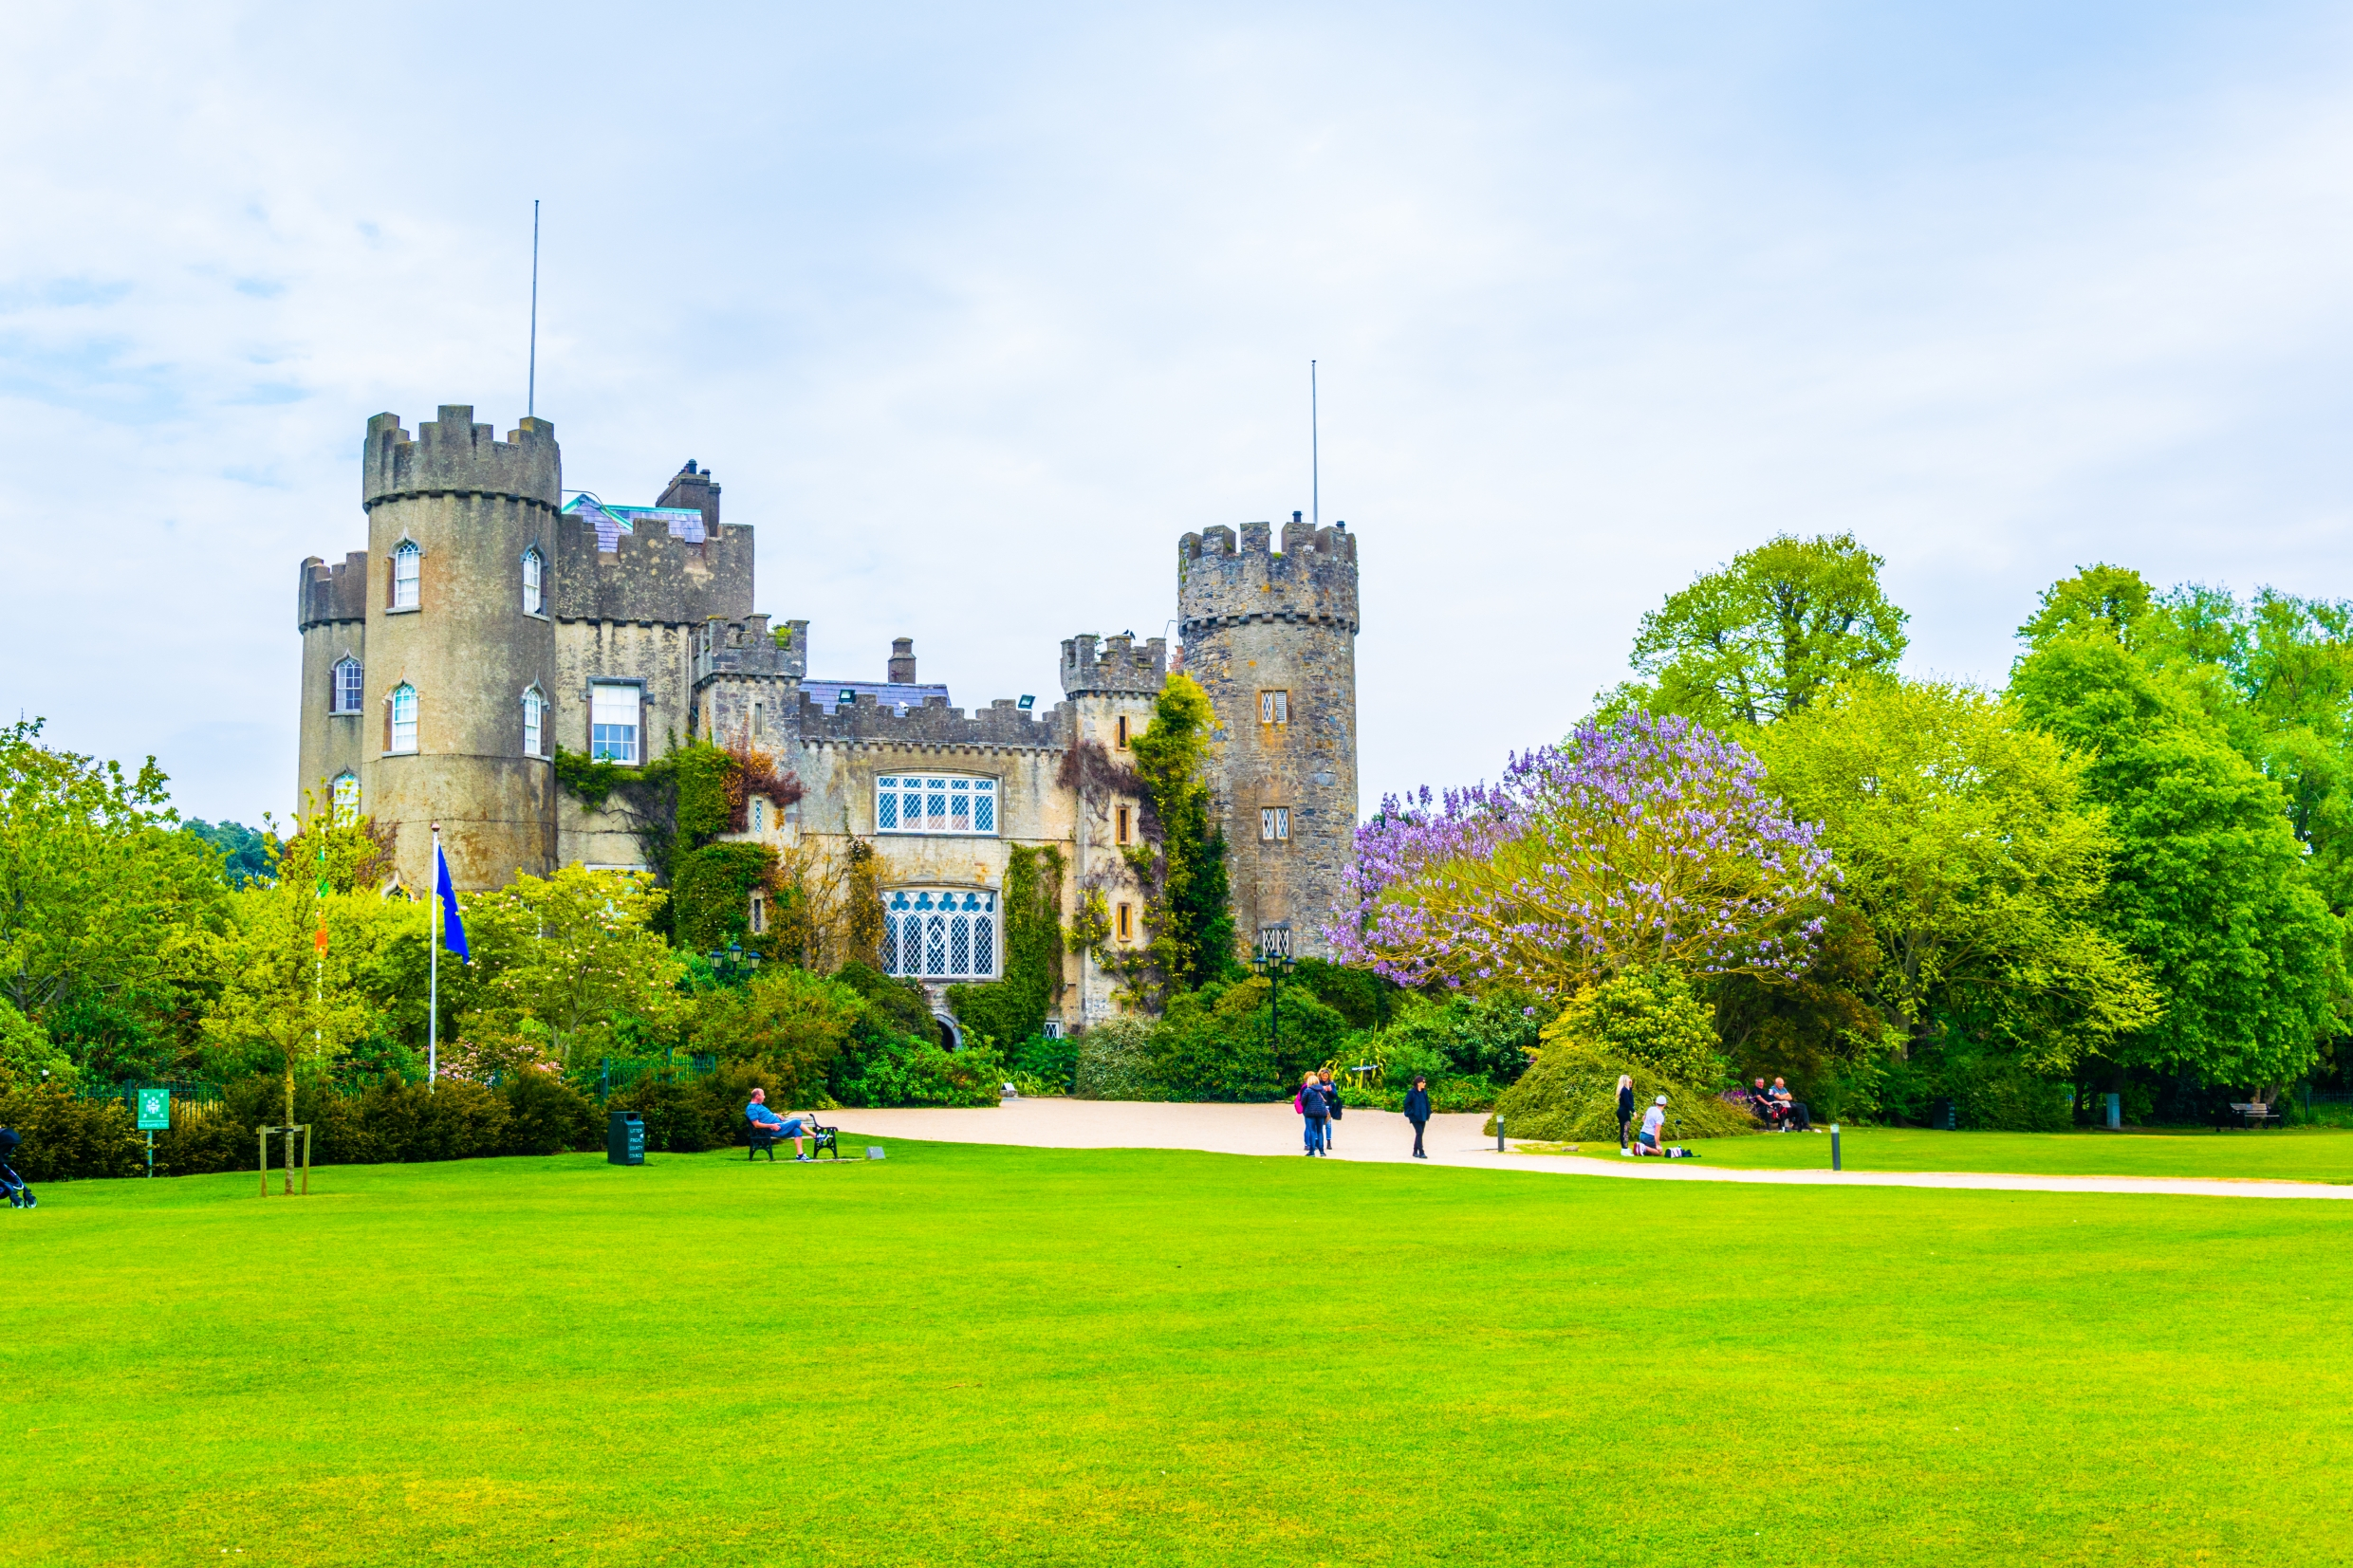 View of the famous Malahide castle with purple flowers blooming around it. 